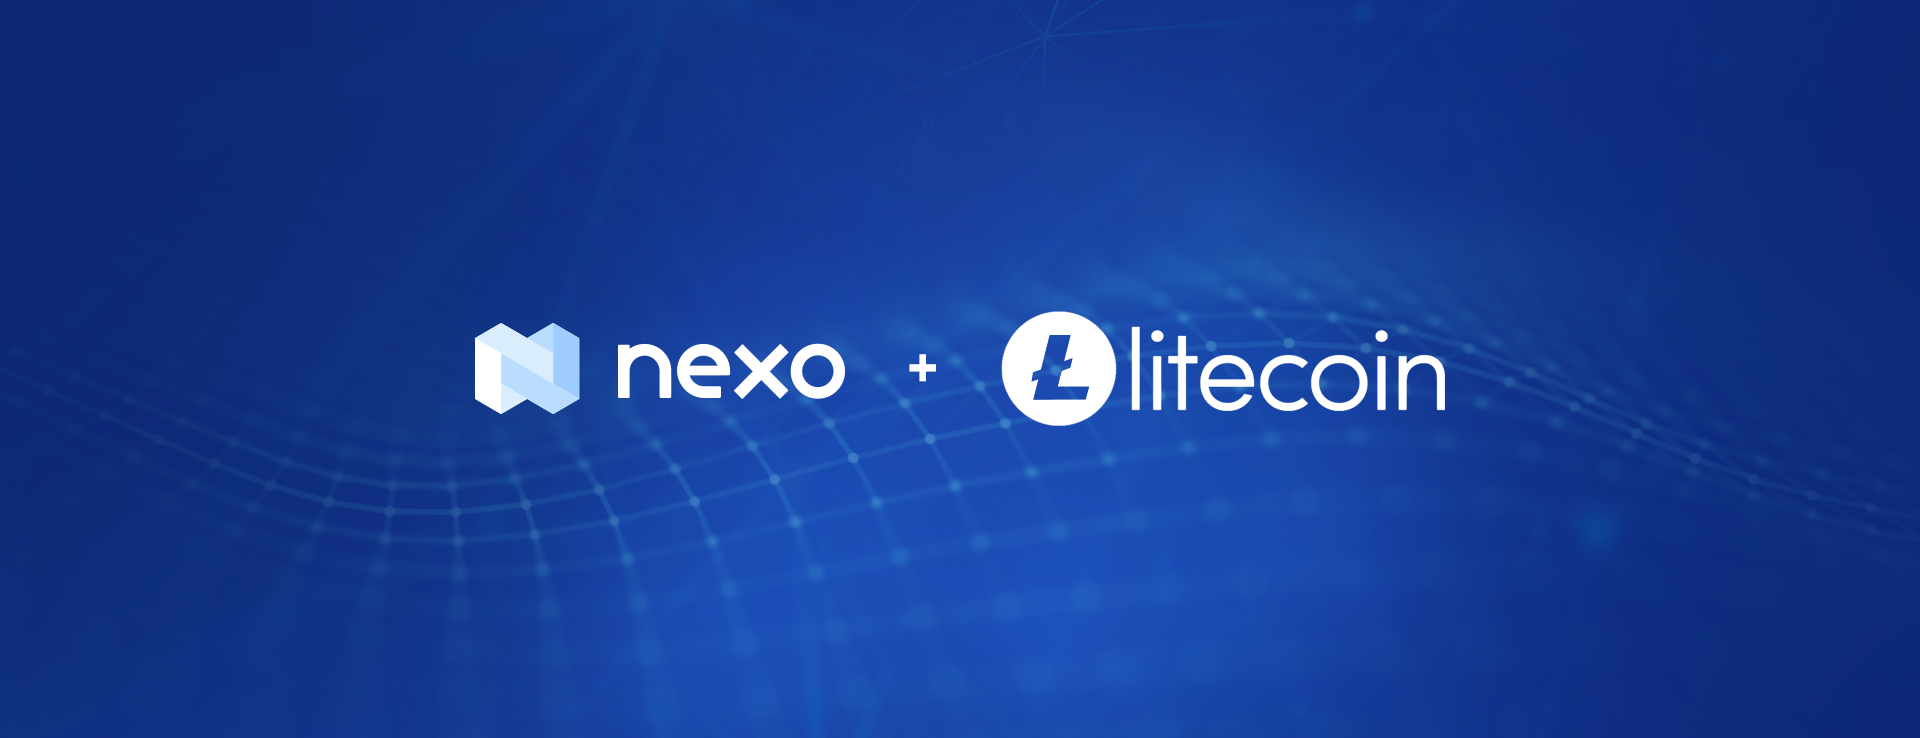 LTC Now Available for Nexo’s Instant Credit Lines